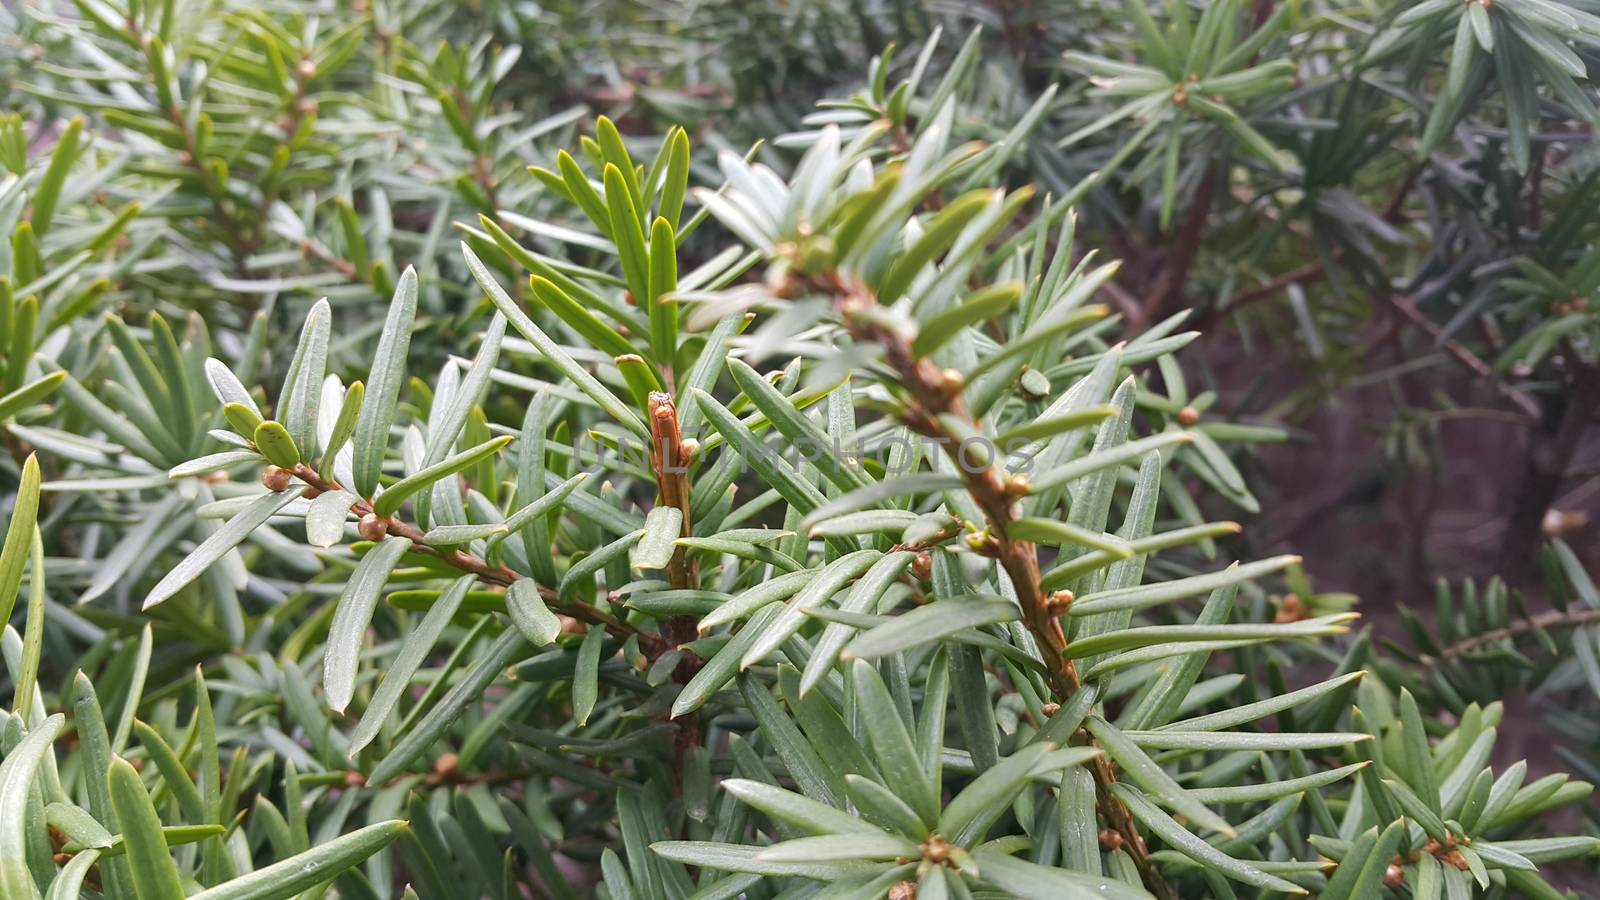 Green leaves of Taxus baccata, European yew which is conifer shrub by Photochowk